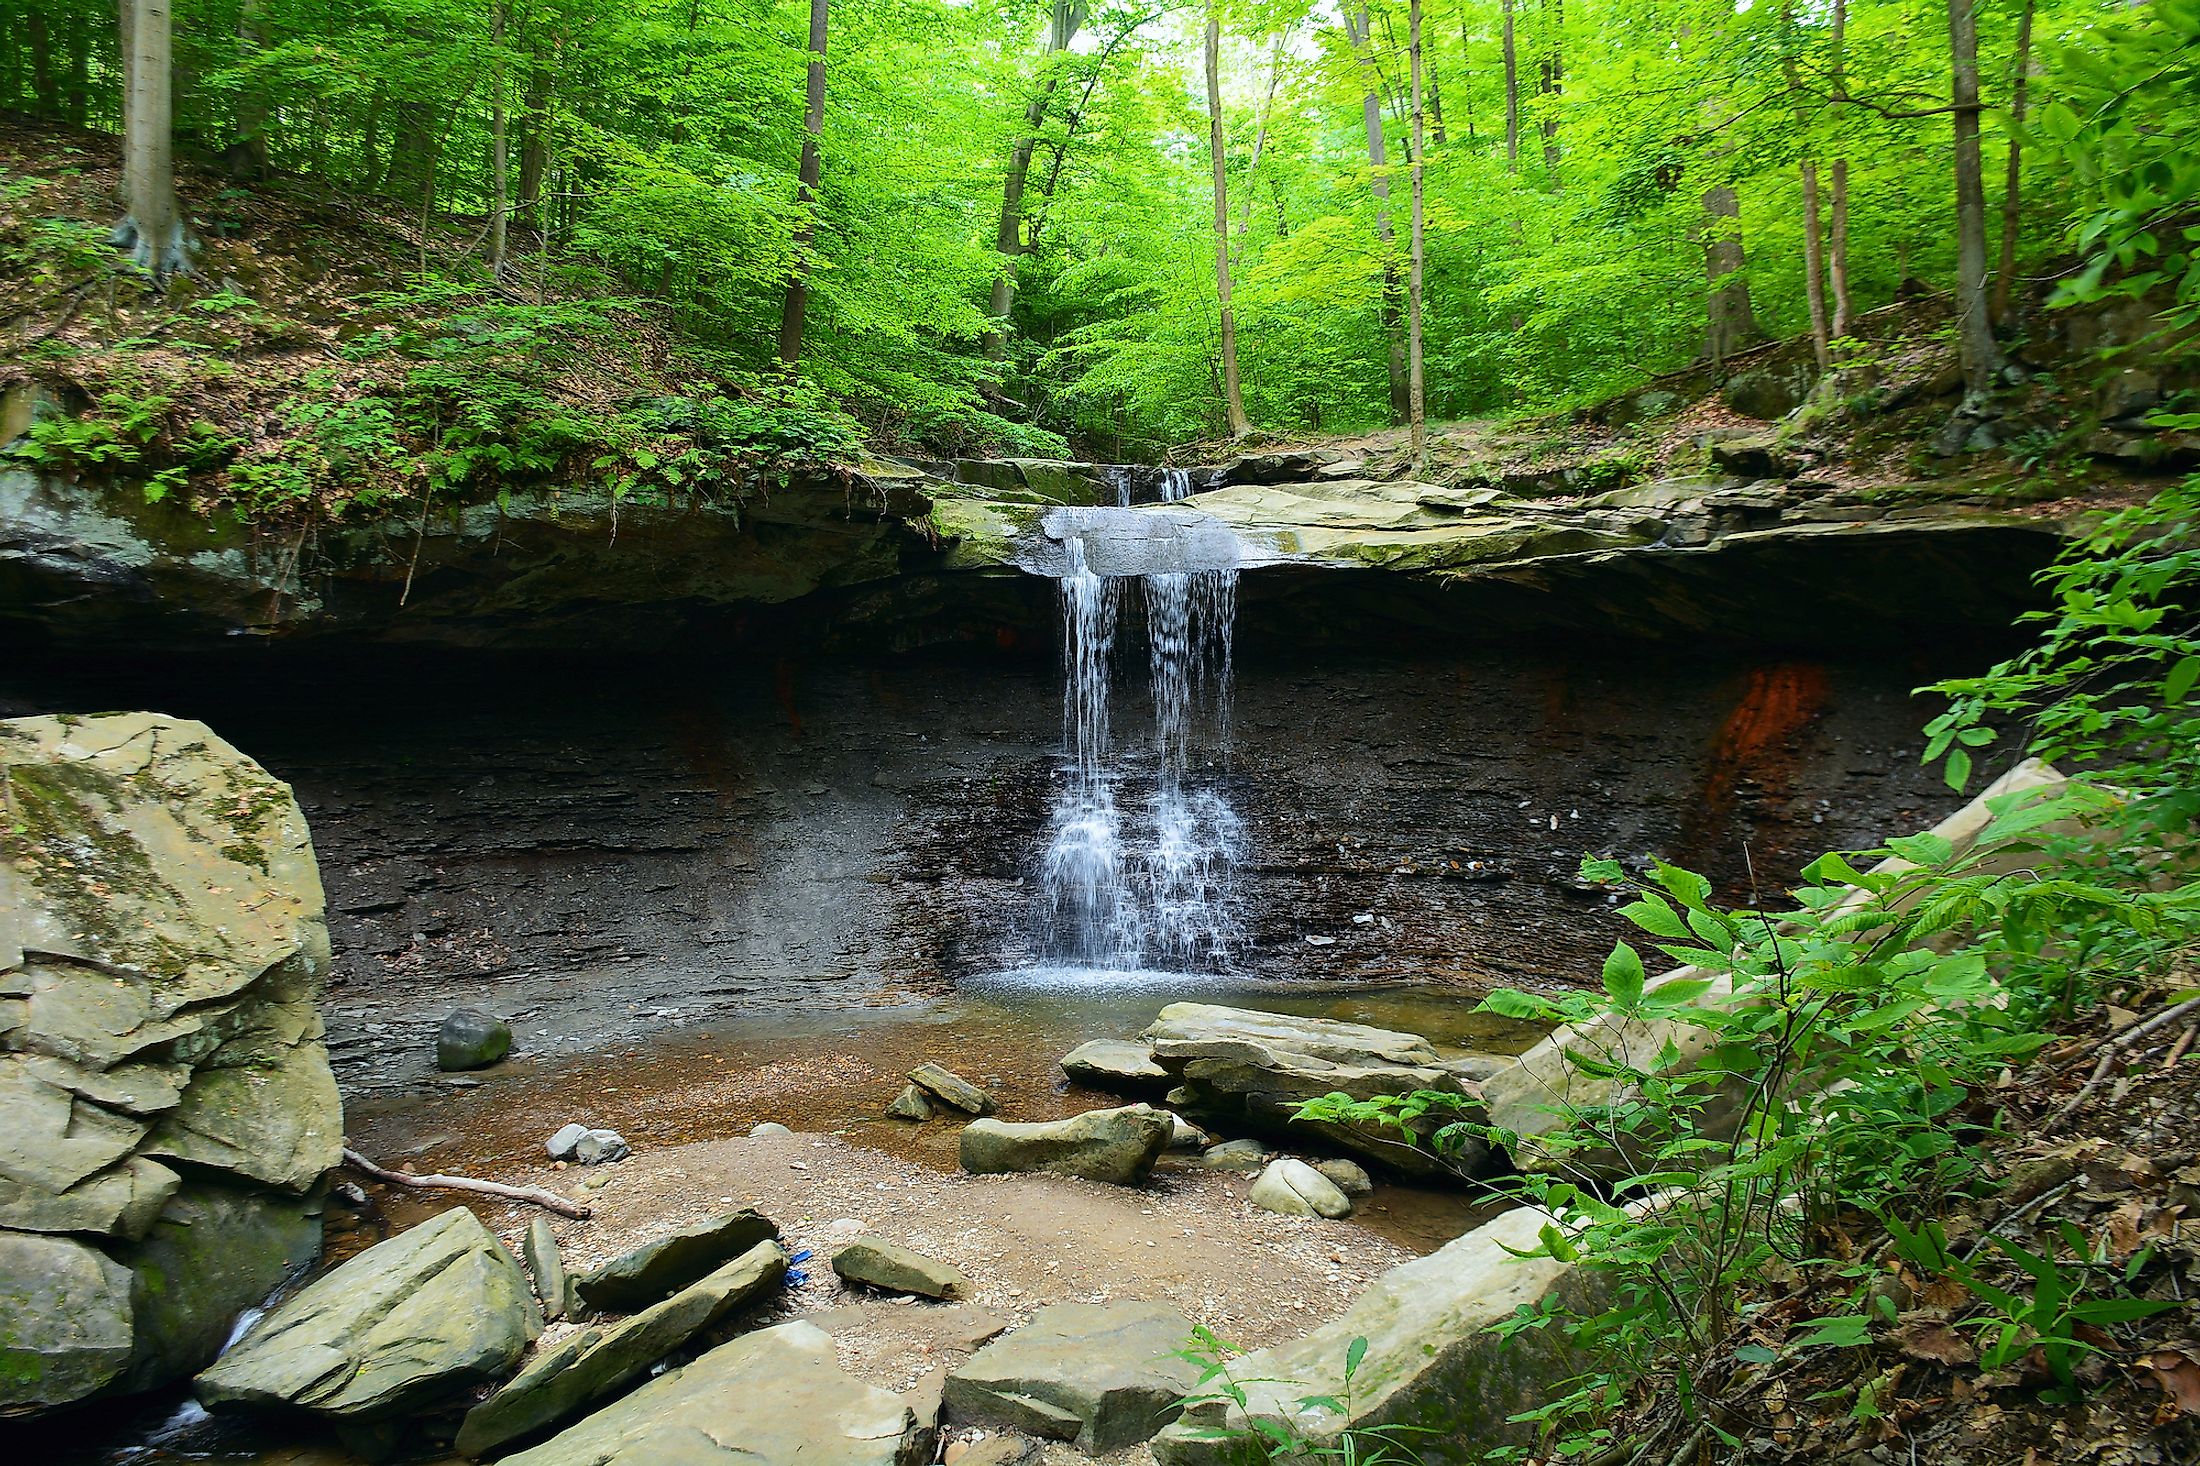 Blue Hen Falls, located in Cuyahoga Valley National Park